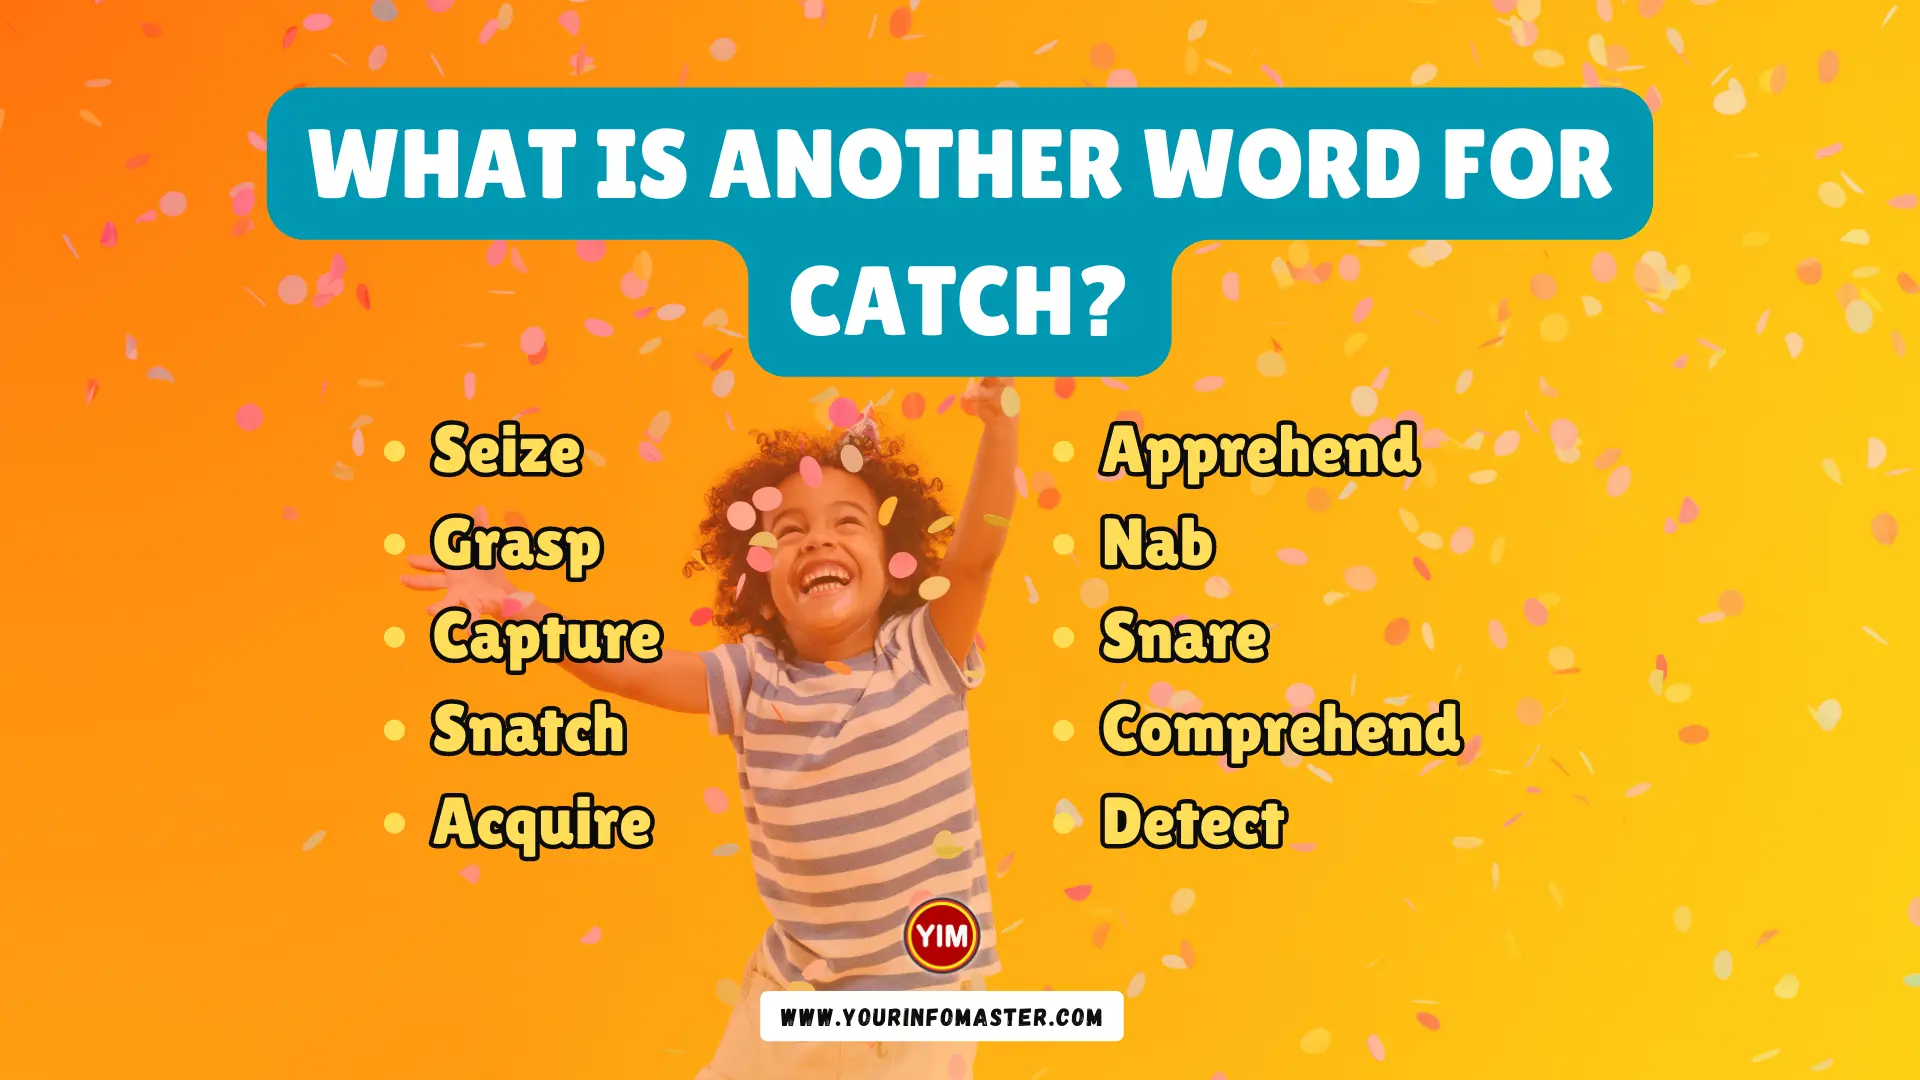 What is another word for Catch